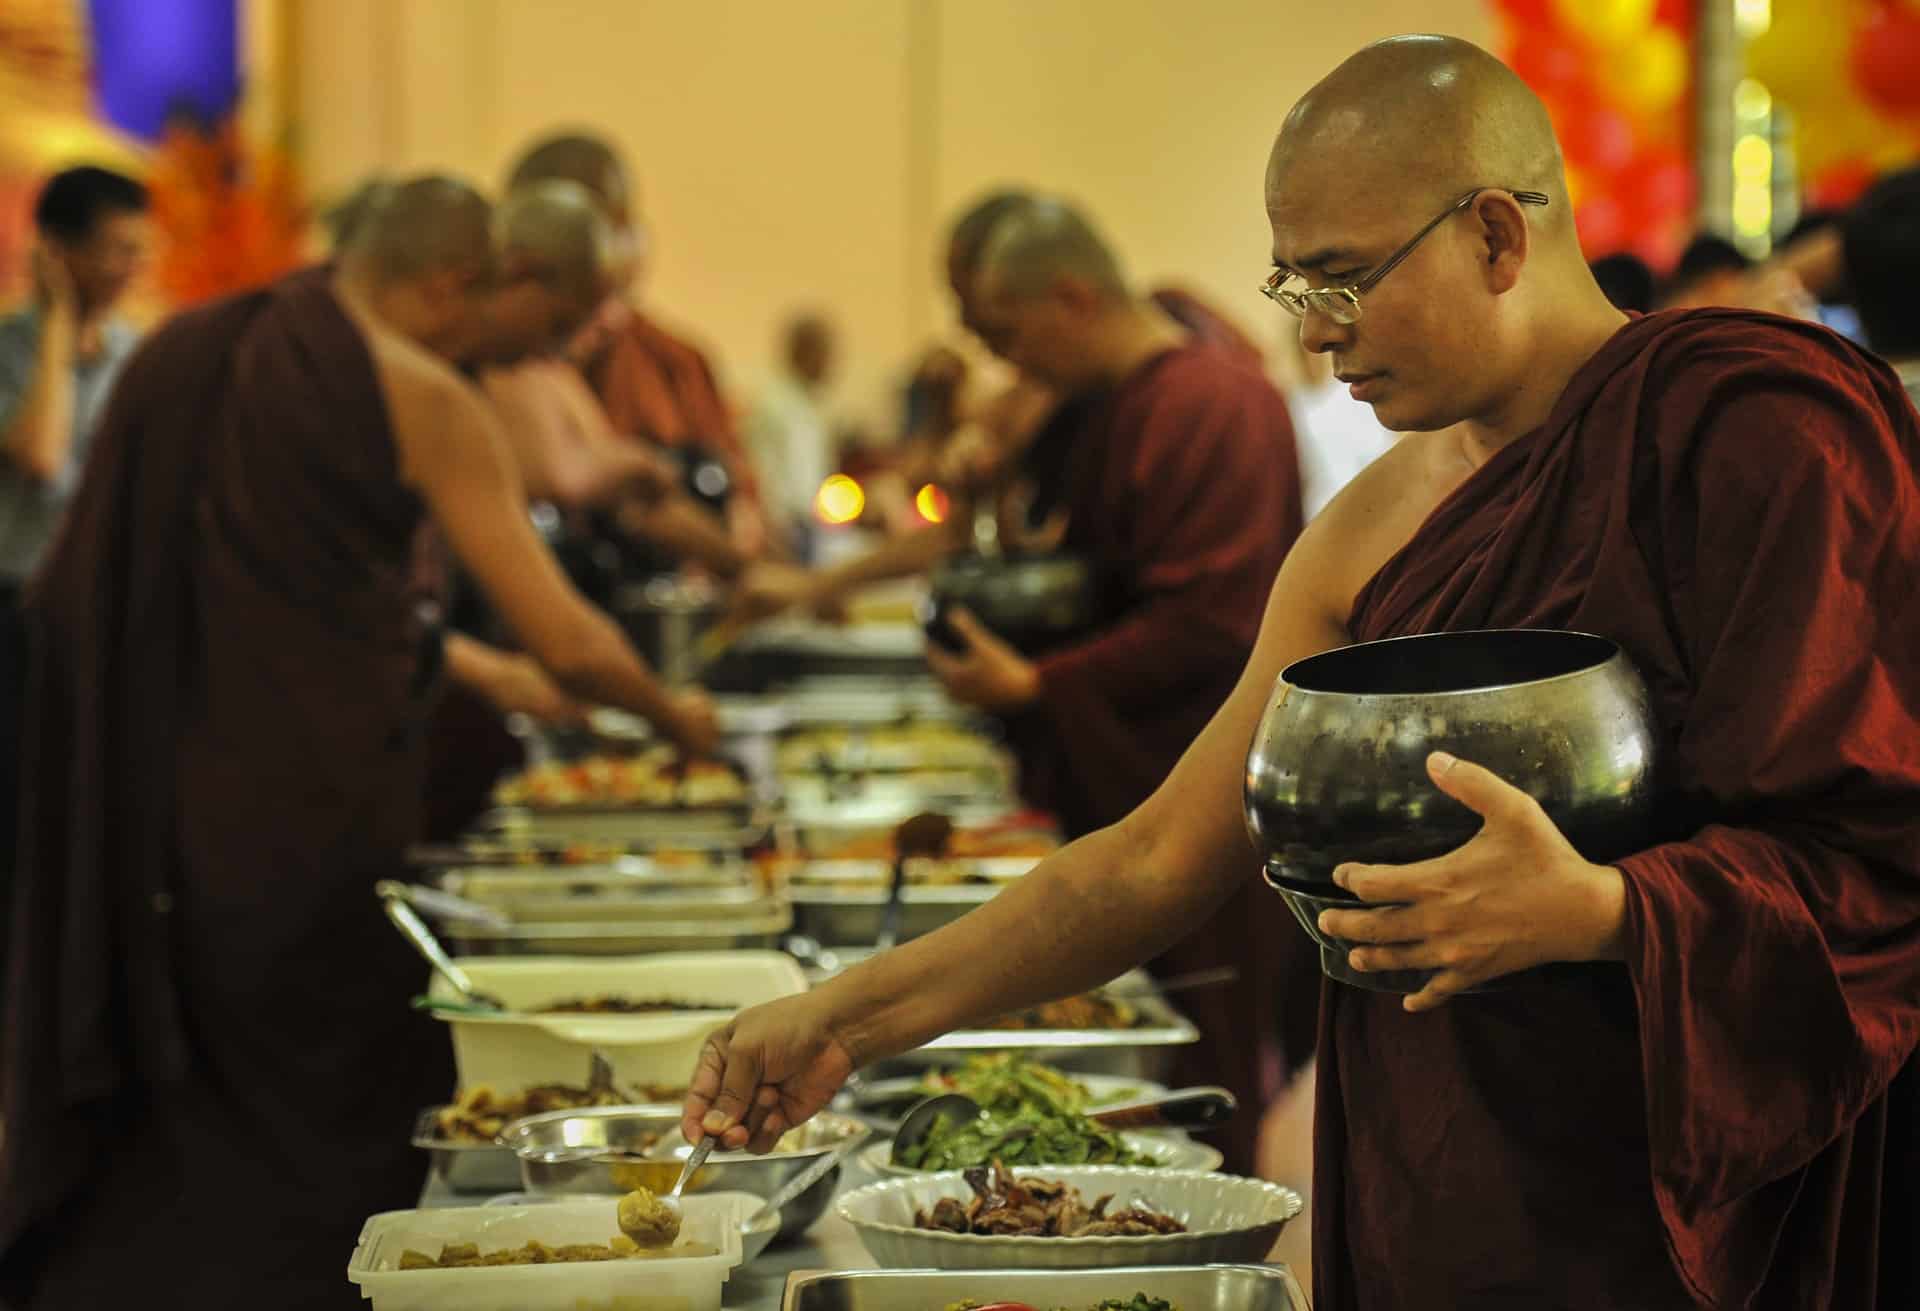 lunch, monks, eating, communal, daily life